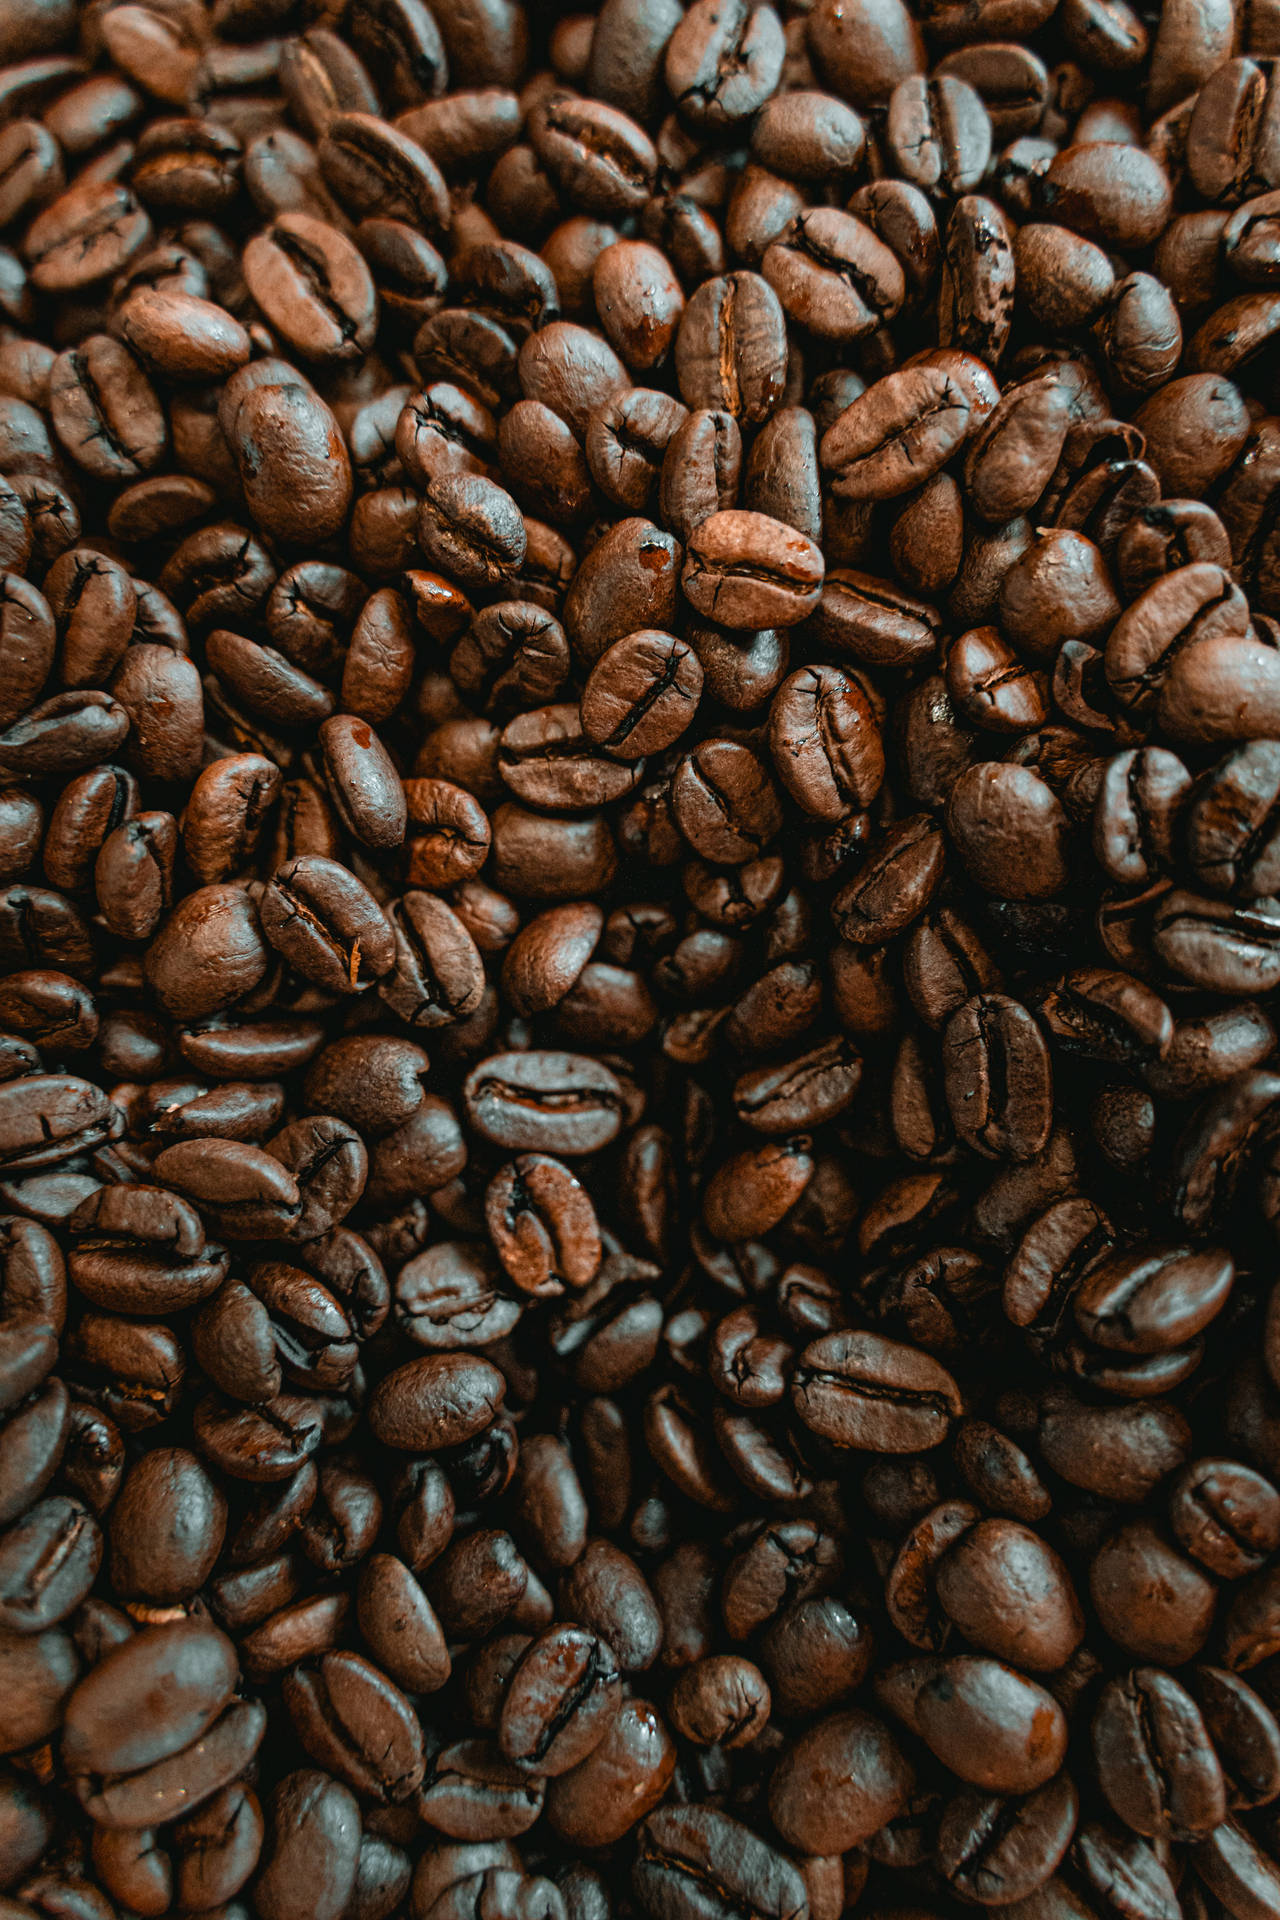 Mobile Coffee Beans Pile Wallpaper